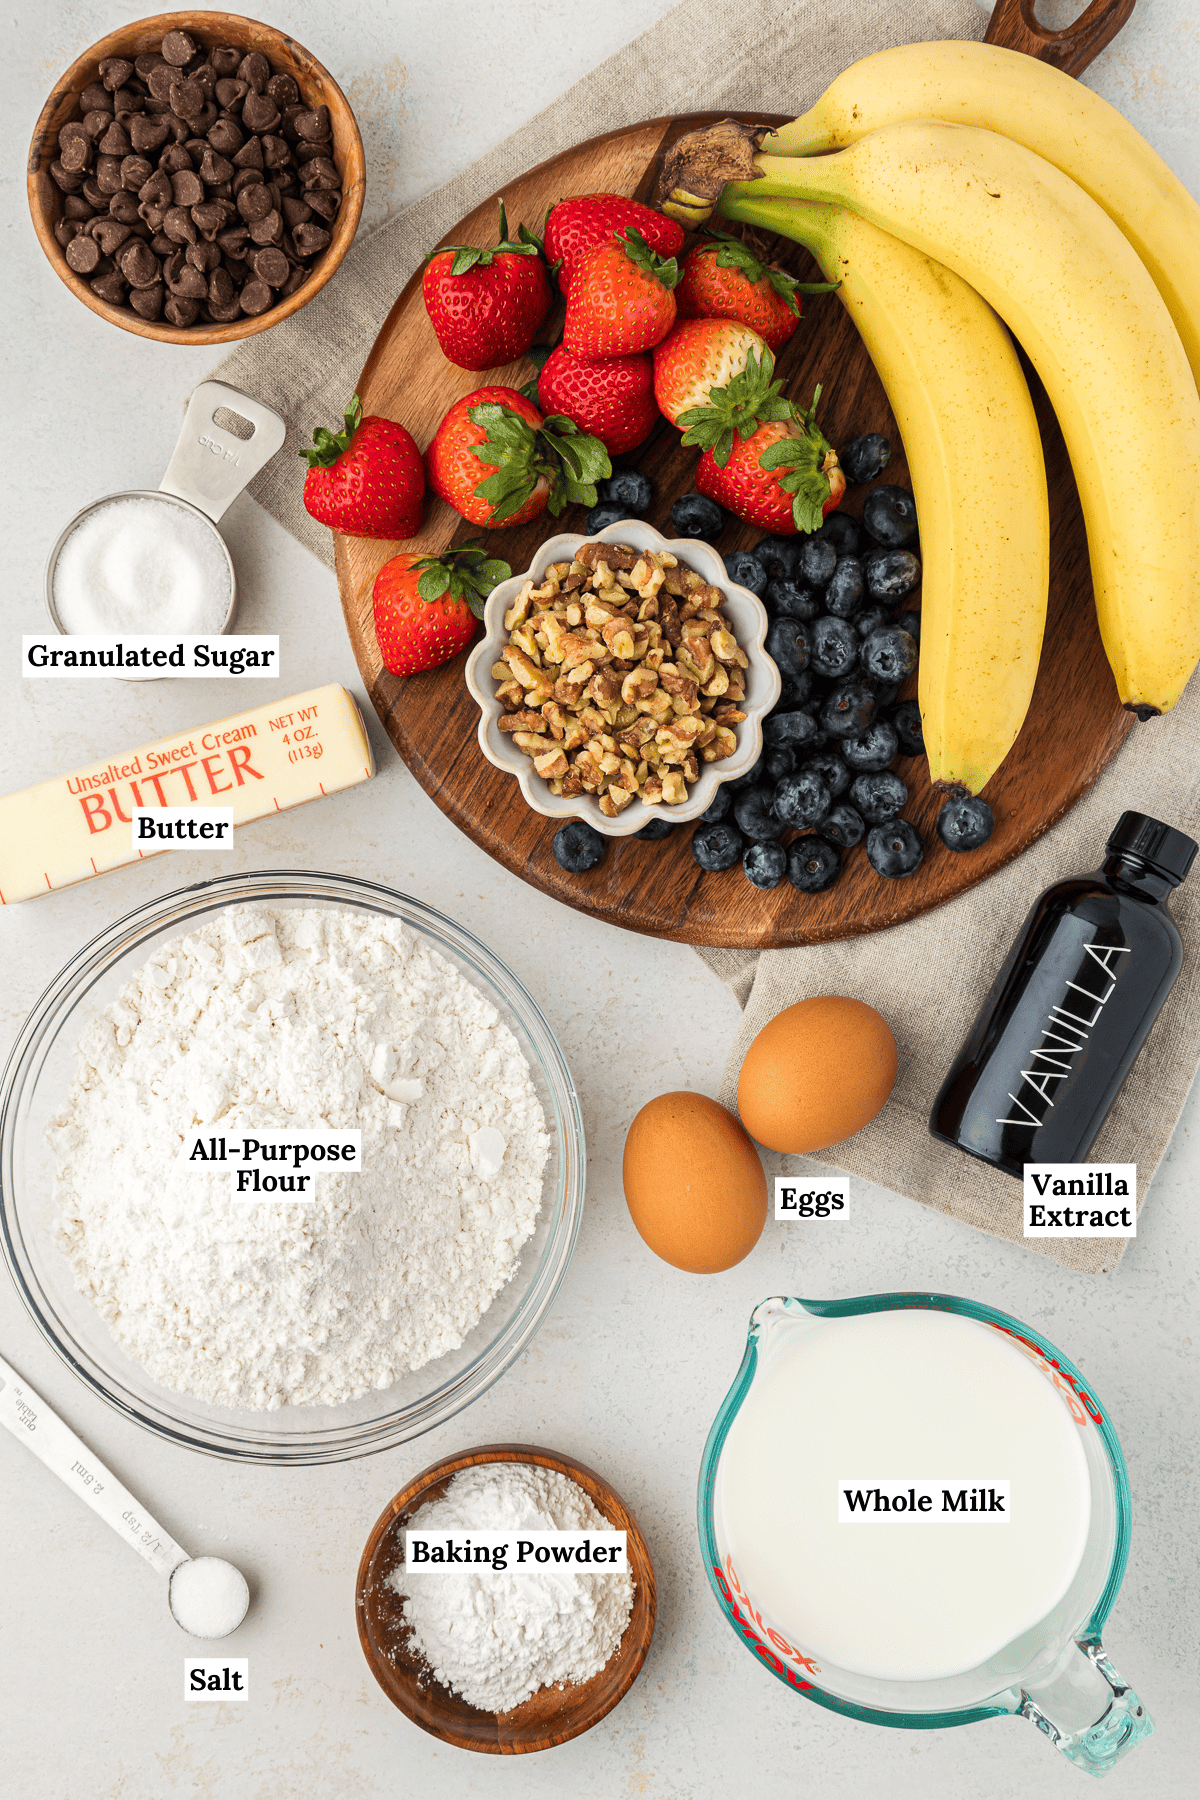 over-head view of ingredients for sheet pan pancakes including whole milk, baking powder, vanilla extract, salt, eggs, all-purpose flour, butter, granulated sugar, chocolate chips, bananas, strawberries, blueberries and nuts